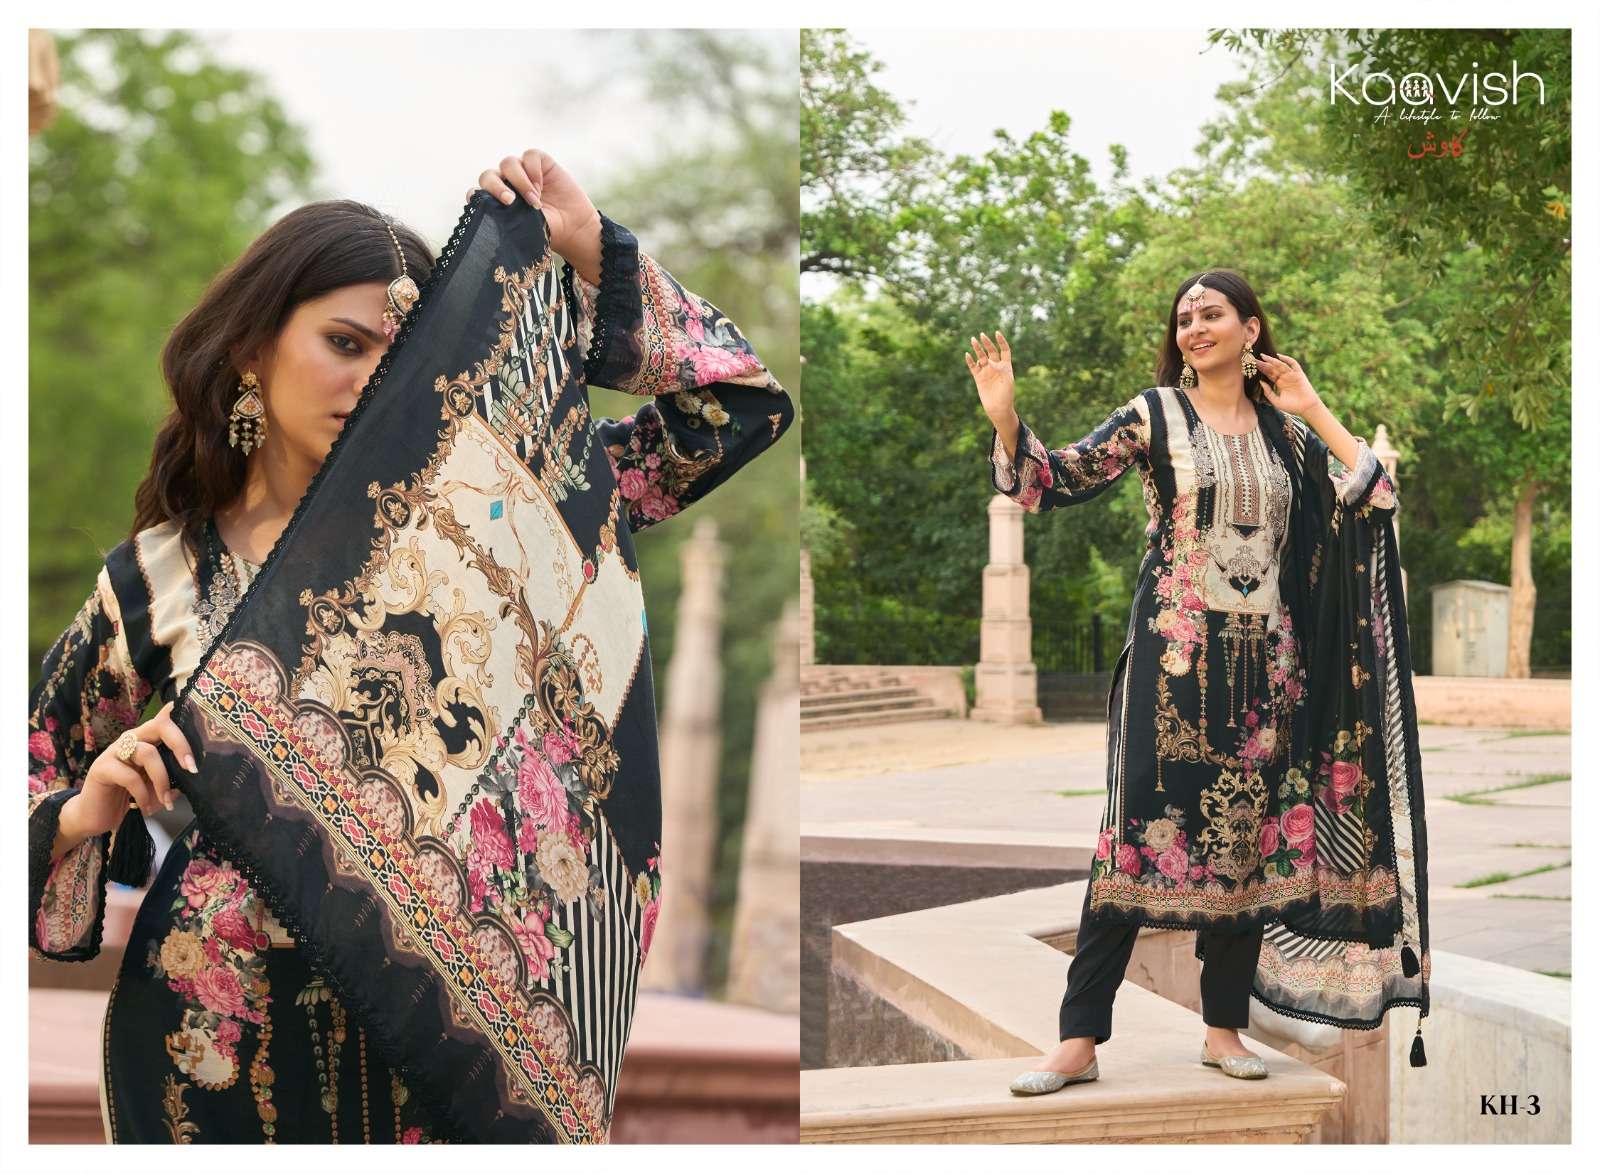 Kainat By Kaavish 1 To 4 Series Beautiful Festive Suits Colorful Stylish Fancy Casual Wear & Ethnic Wear Pure Viscose Muslin Print Dresses At Wholesale Price